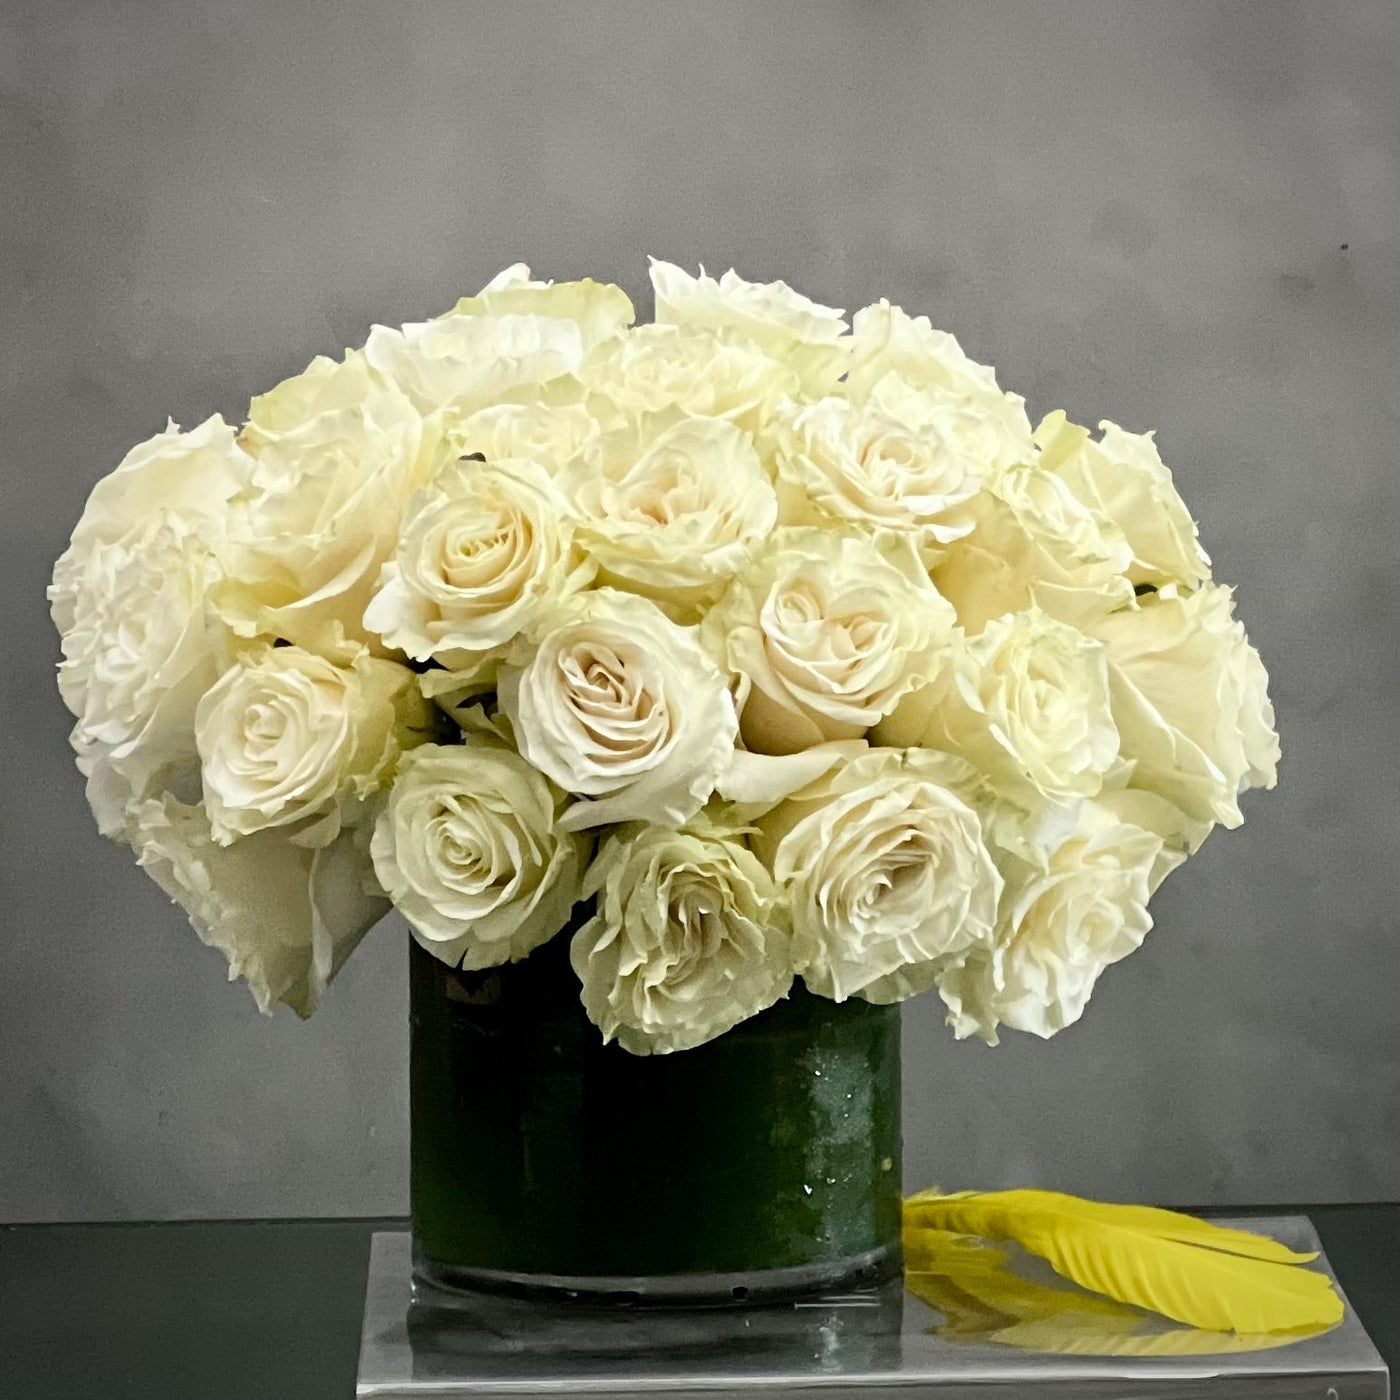 Beverly Hills Florist presents this simplicity, pure, and elegant white roses in a classic 5x5 glass vase. Specialty premium white Ecuadorian roses are clustered in a fresh, full and delicate arrangement.  Standard: 2 Dozen Roses as pictured 6 inch  Deluxe As Shown: 4 Dozen Roses Premium: 8 Dozen Roses 8" 